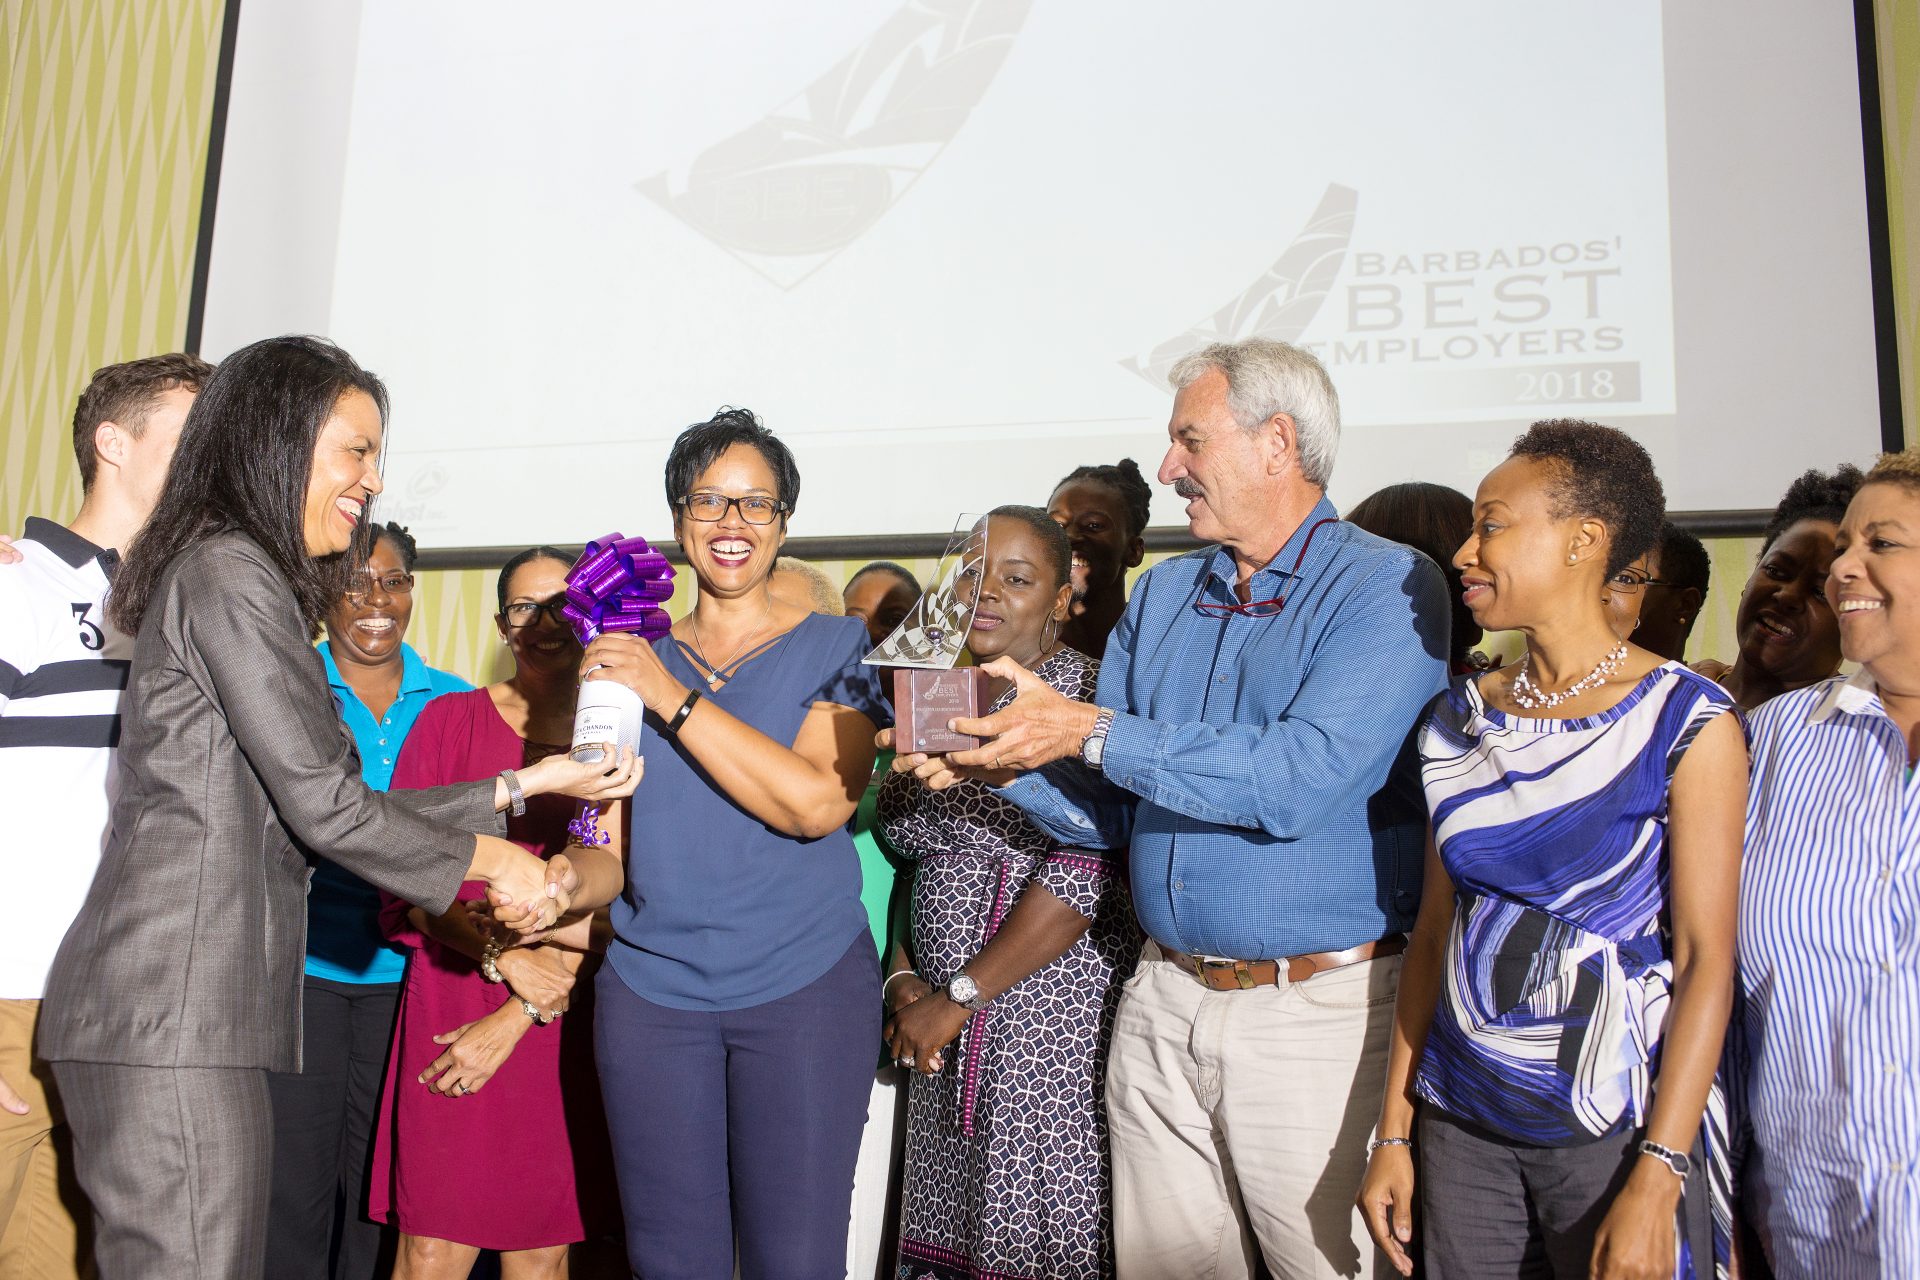 Laura Husbands at Caribbean Catalyst Inc. presenting the award to Bougainvillea Winner in the Large category